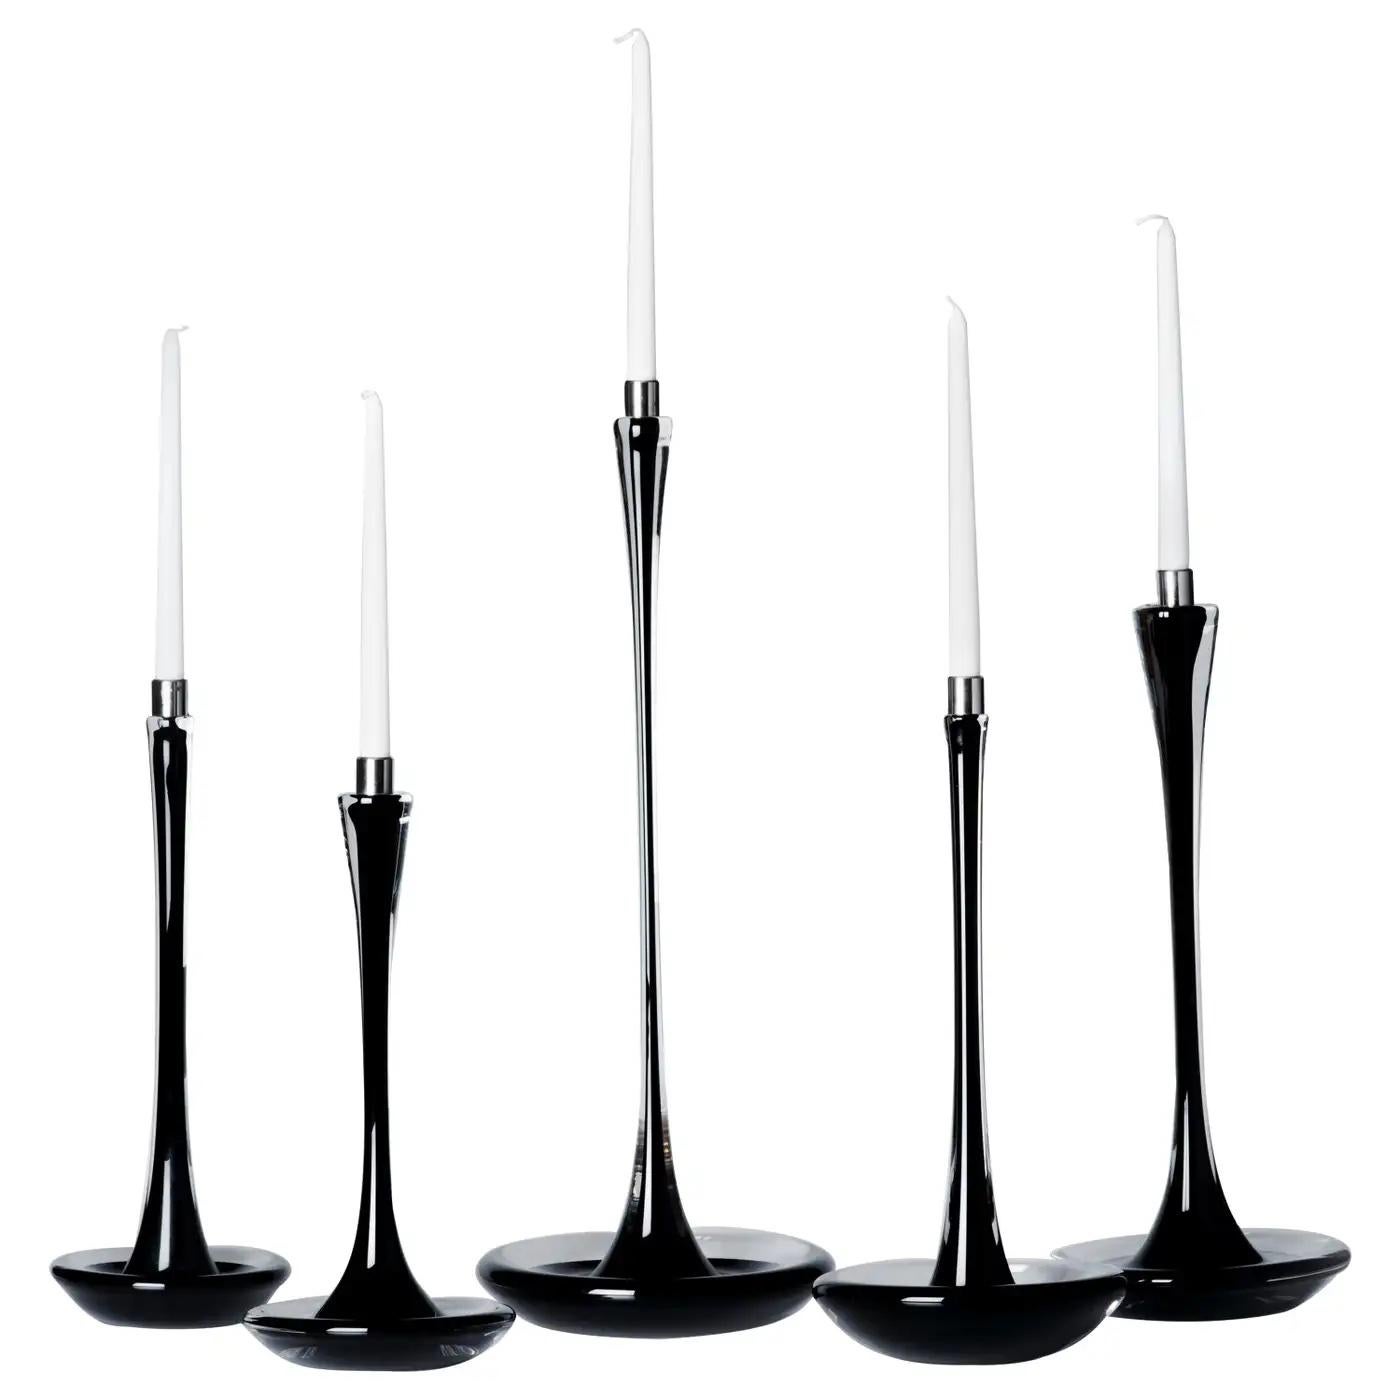 Contemporary American artist Moshe Bursuker's hand-sculpted solid set of 5 black glass candleholders with a mirror finished stainless steel cup. These pieces are uniquely handcrafted to show off the nature of the material they are made from. The